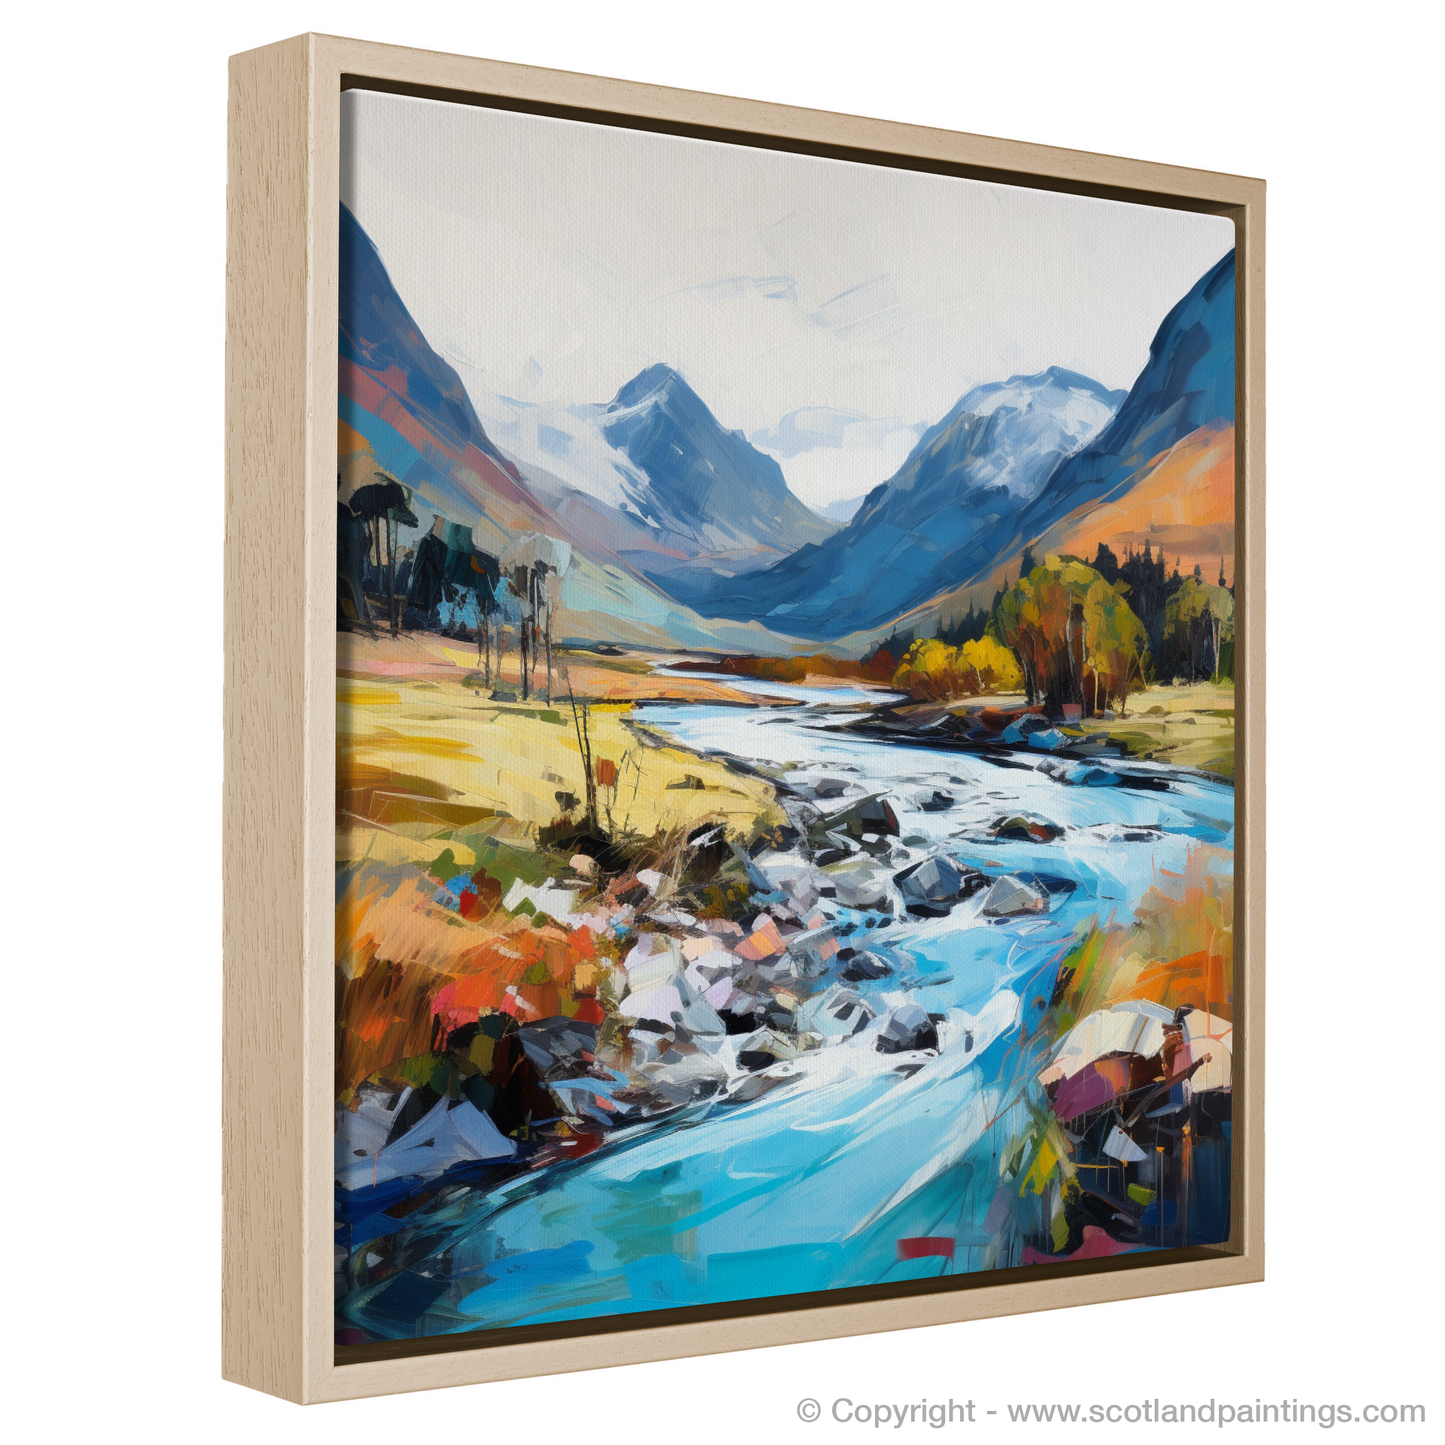 Painting and Art Print of River Coe, Glencoe, Highlands entitled "River Coe Rhapsody: An Expressionist Ode to the Scottish Highlands".